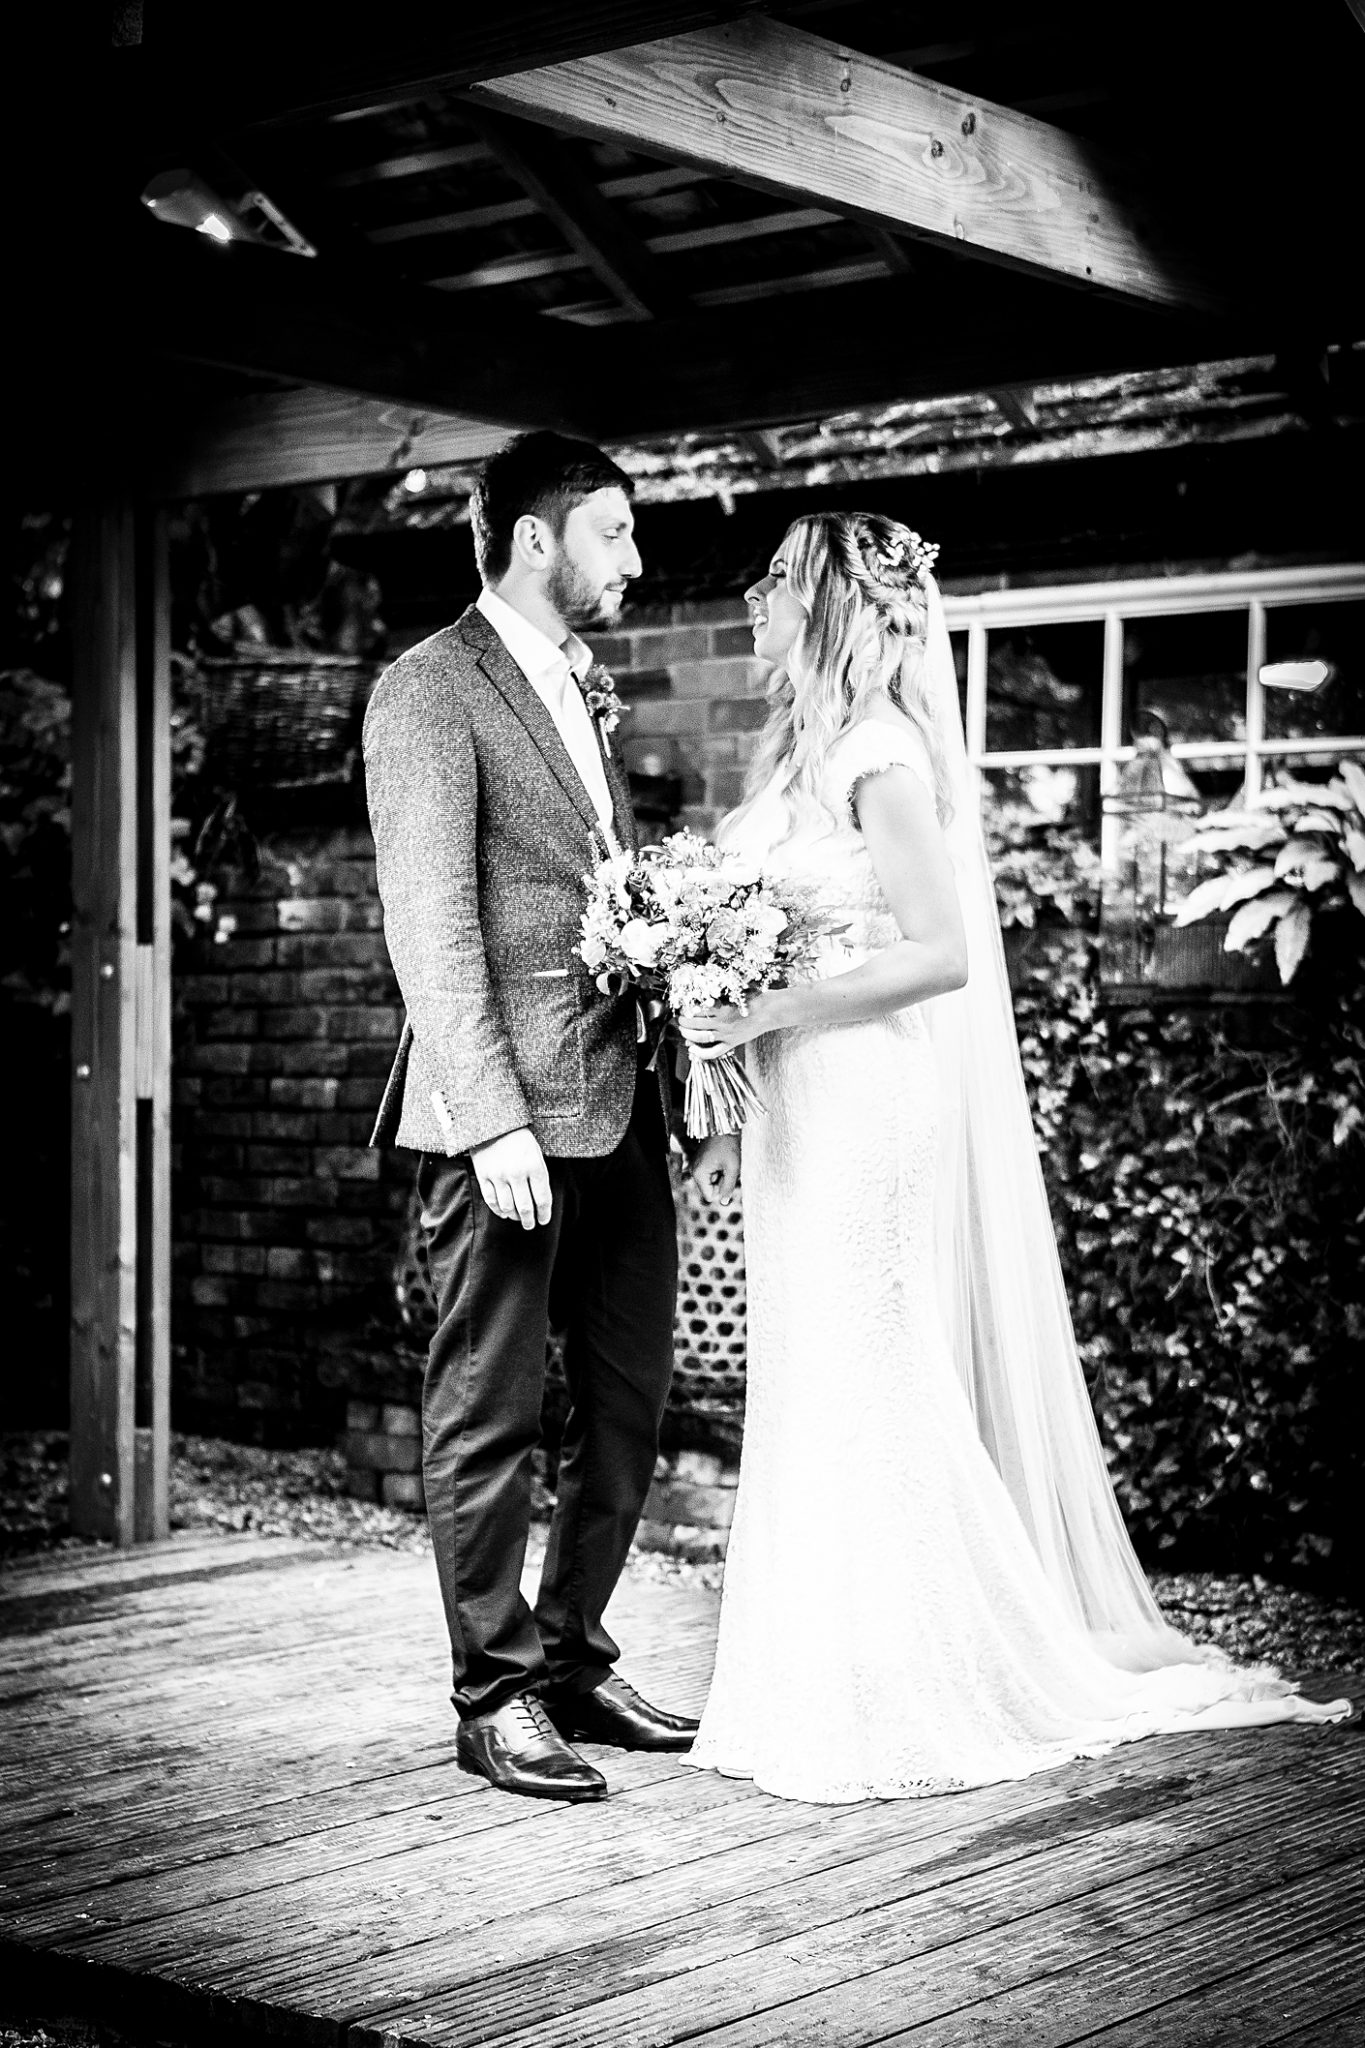 wedding-photography-of-the-bride-and-groom-at-the-didsbury-hotel-manchester